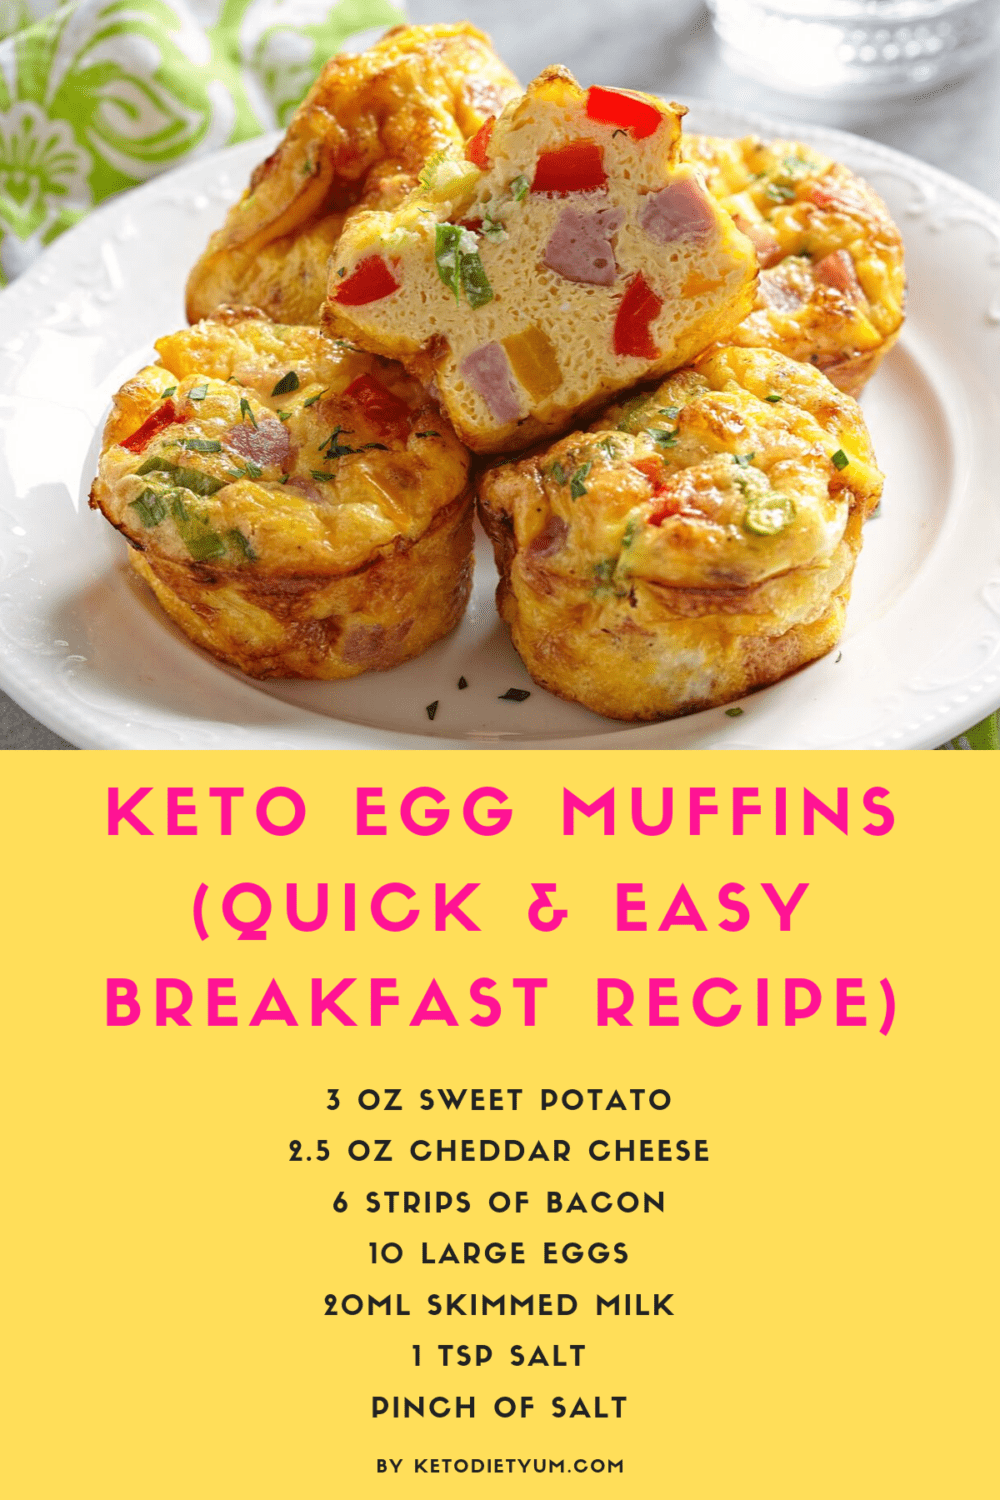 This gluten-free Keto Egg Cup (or Keto Egg Muffin as it’s sometimes referred to) recipe is a good example of something that is easy to make and good for all the family to enjoy. #ketodiet #ketorecipes #lowcarbrecipes